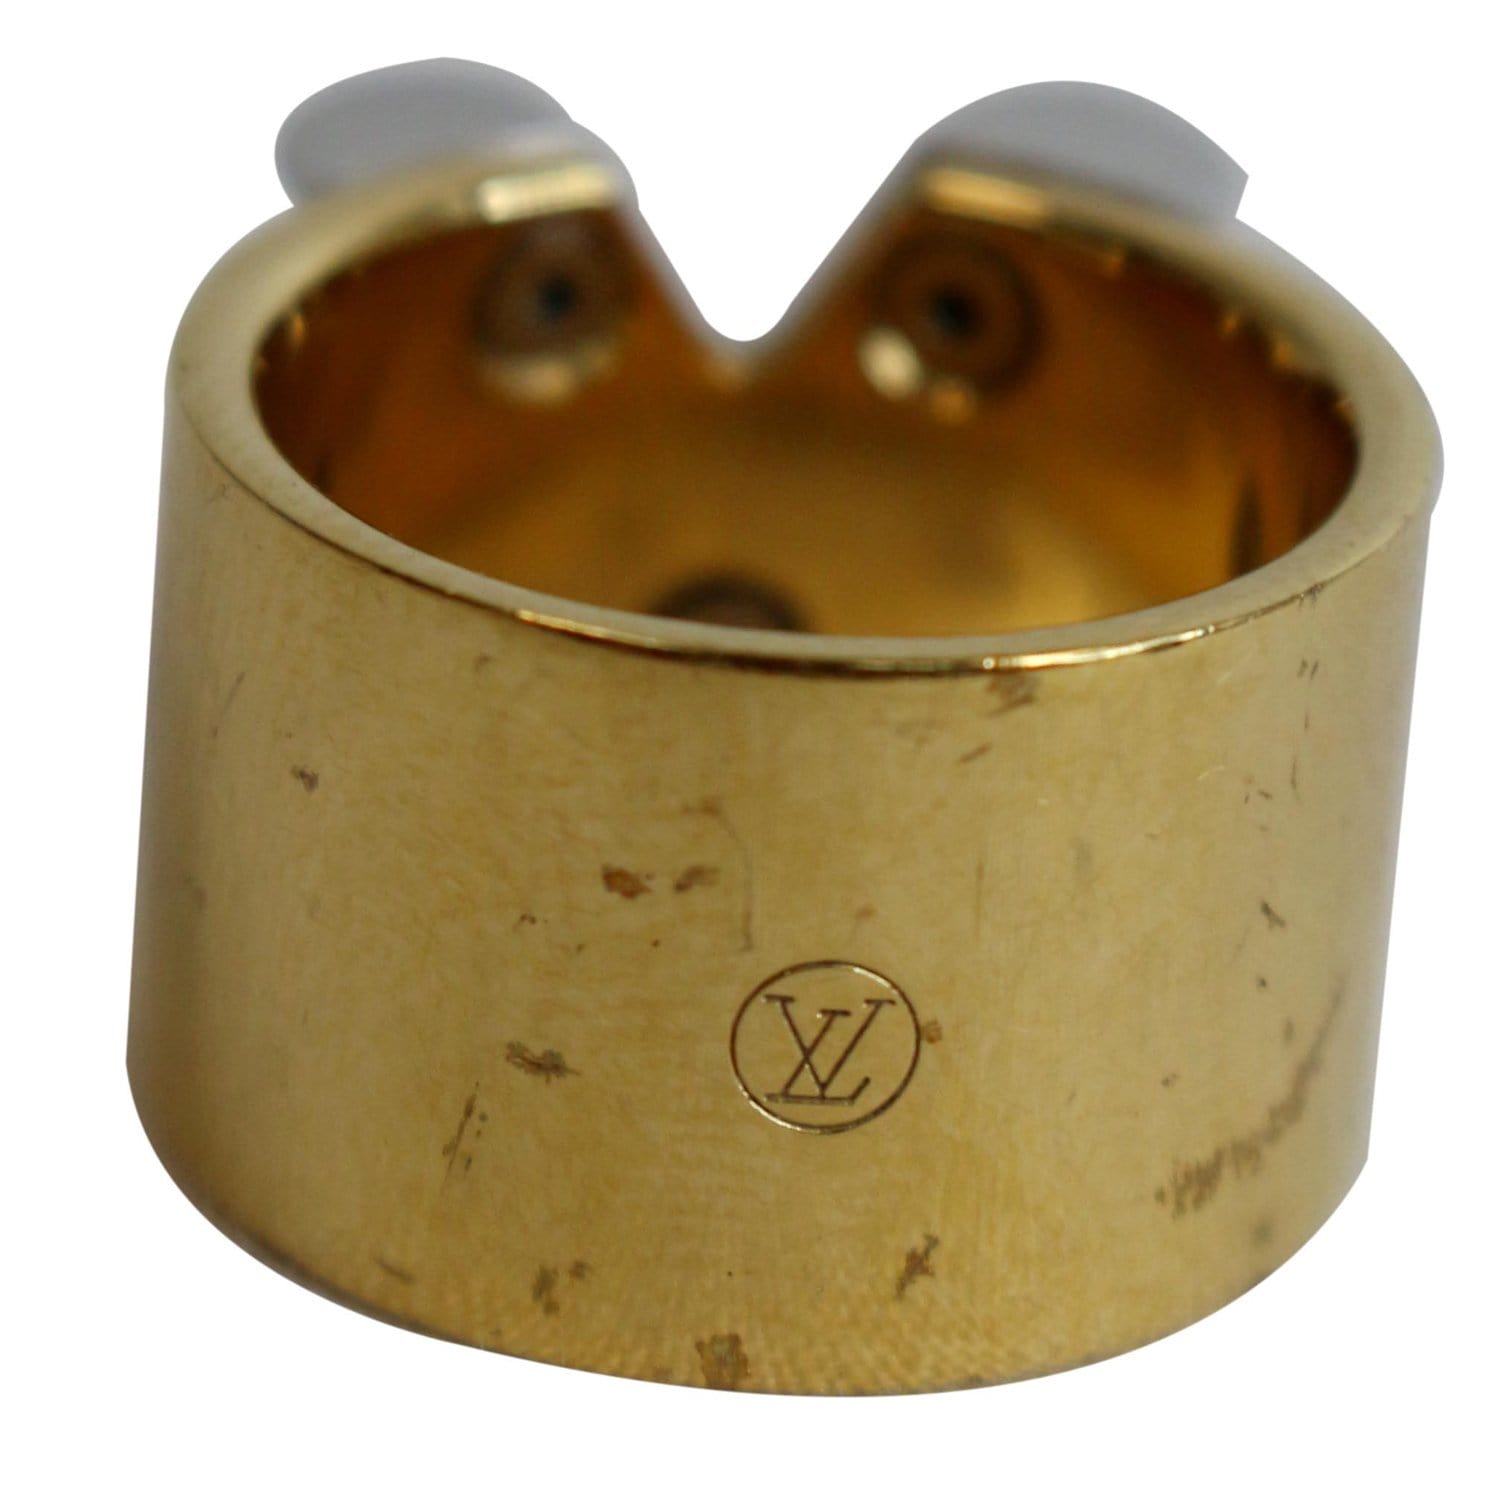 Louis Vuitton - Authenticated Essential V Ring - Gold Plated Gold For Woman, Very Good condition